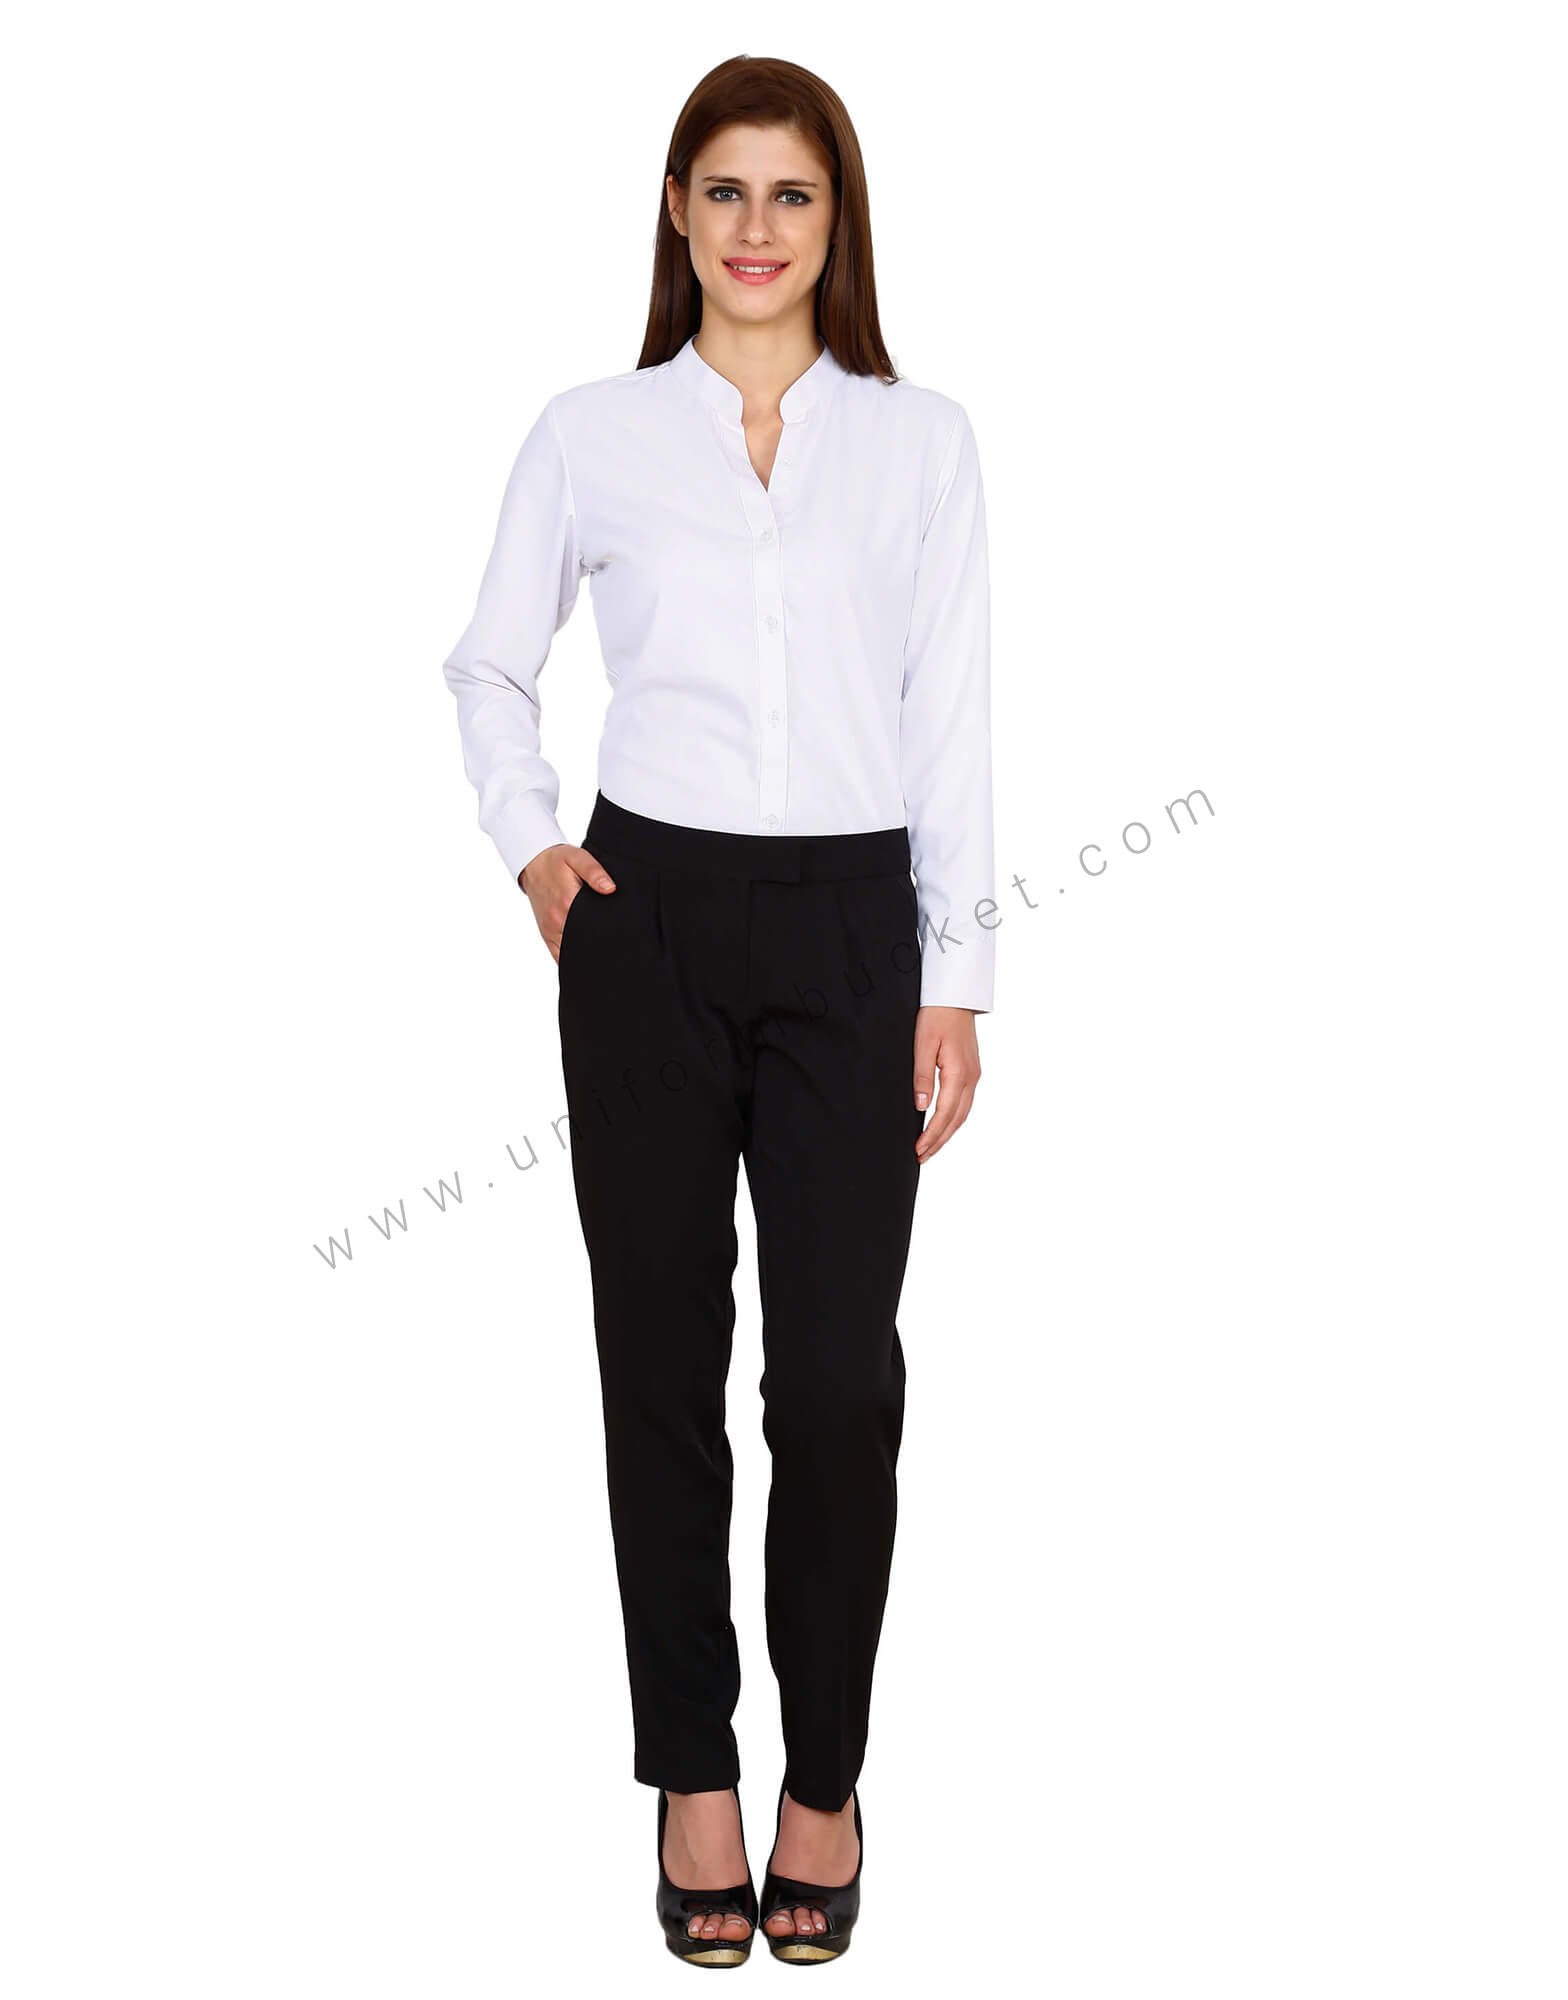 girls trouser pant in Nandyal at best price by Jp Shopping Mall - Justdial